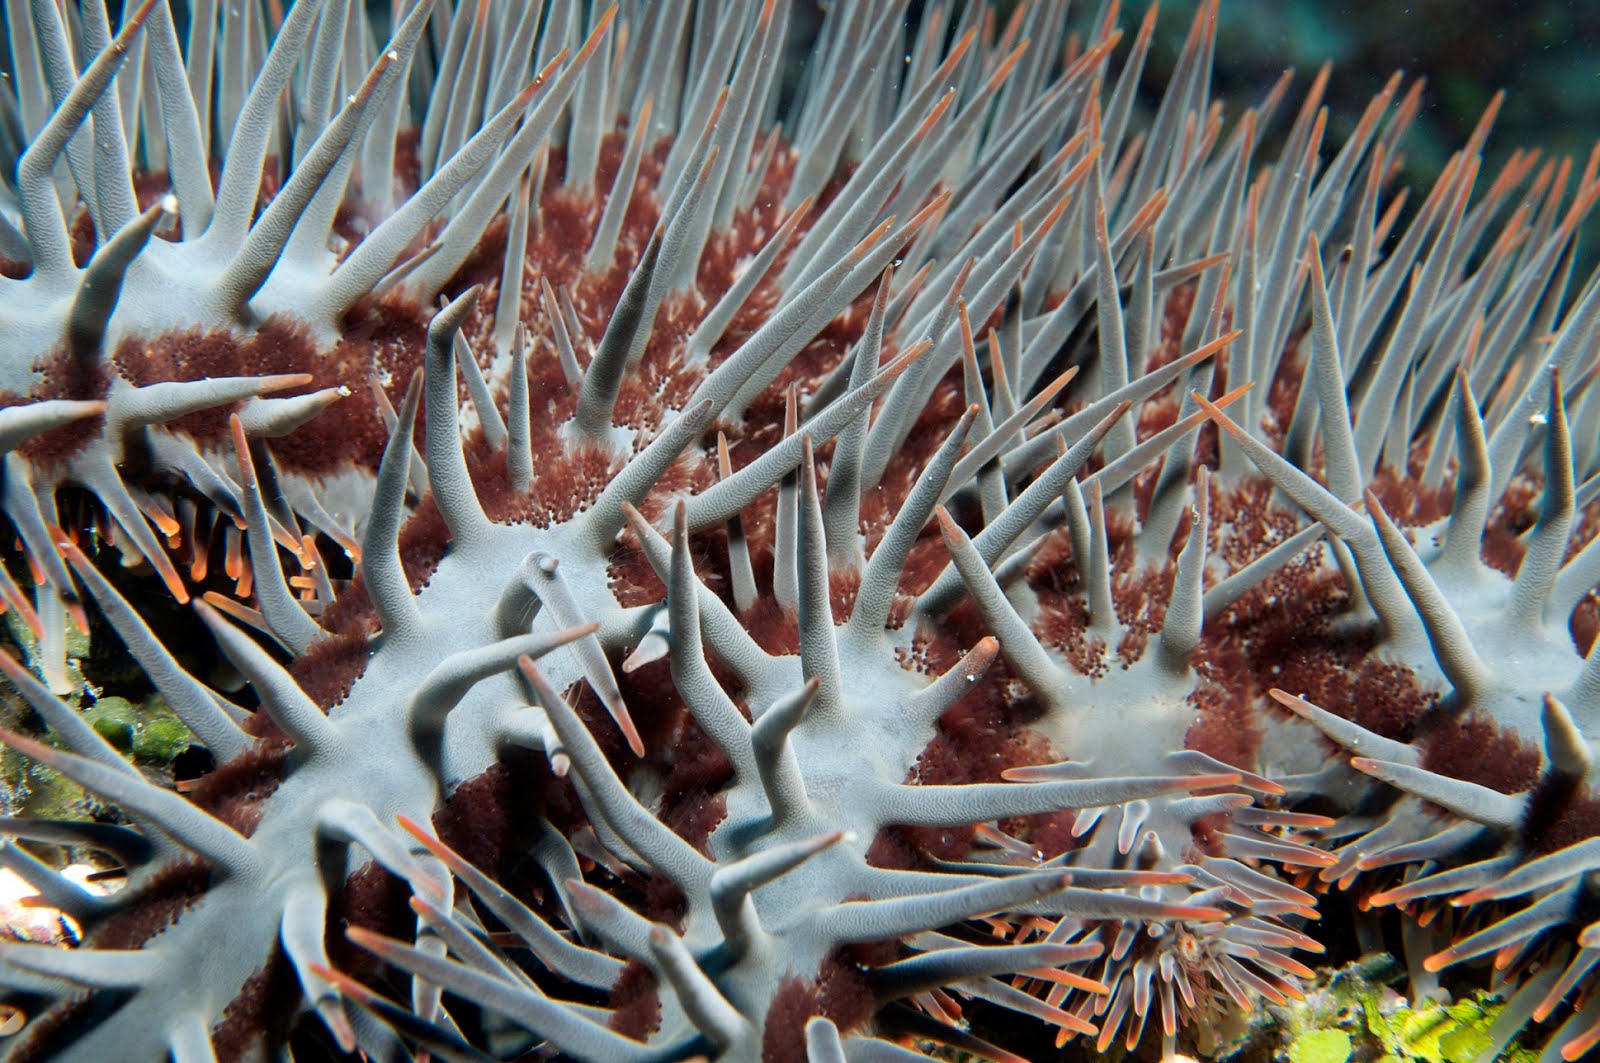 Queensland Great Barrier Reef: The war on the Crown of Thorns Starfish